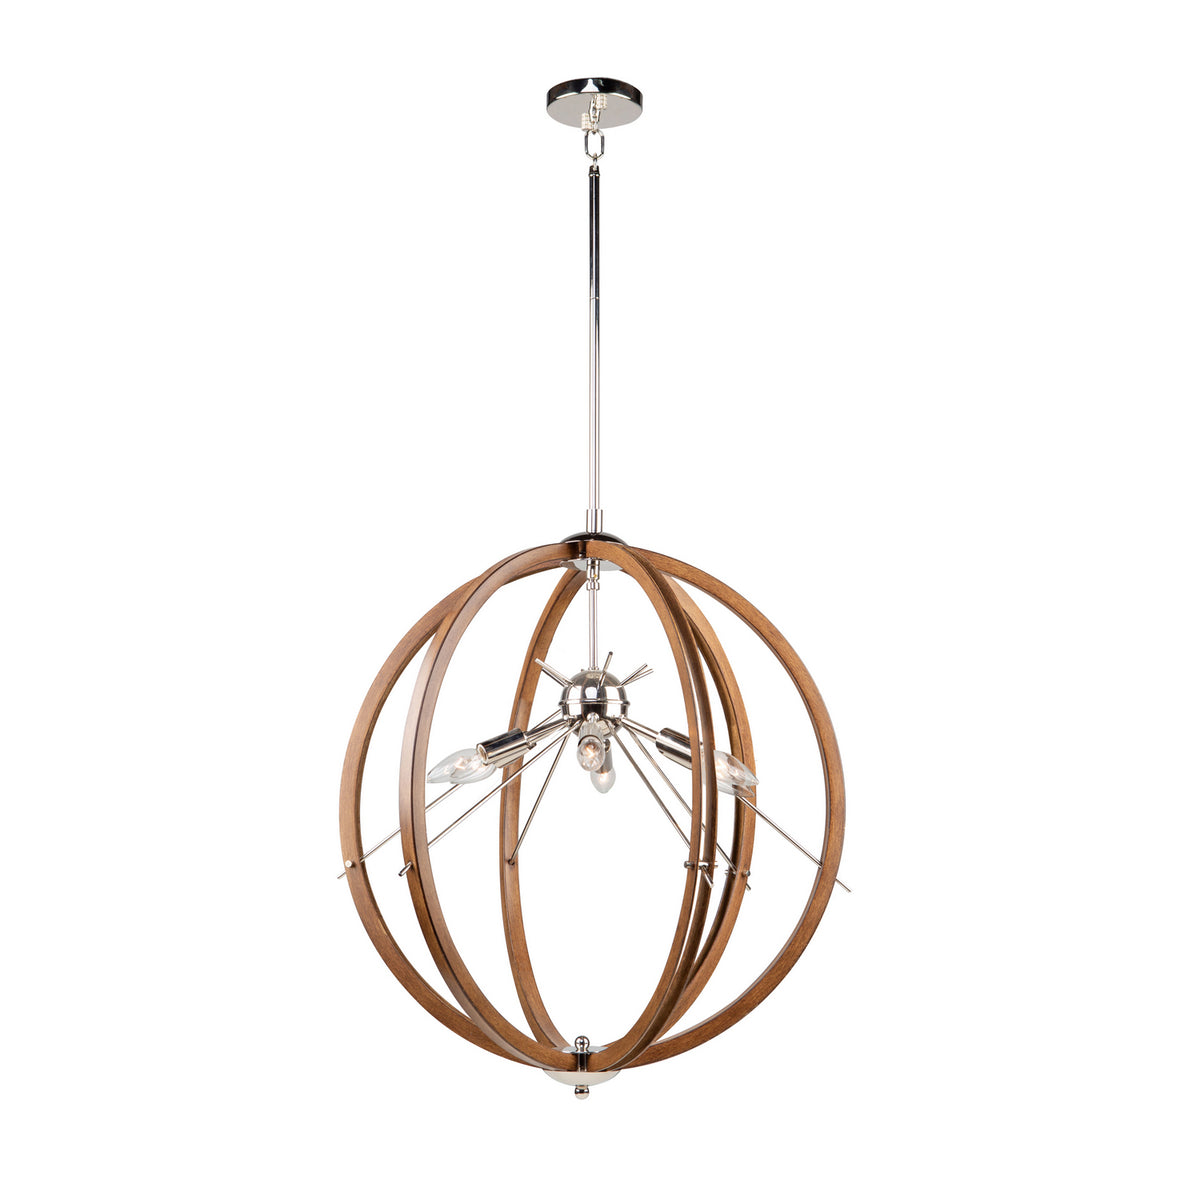 Artcraft Six Light Semi Flush Mount from the Abbey collection in Faux Wood & Polished Nickel finish